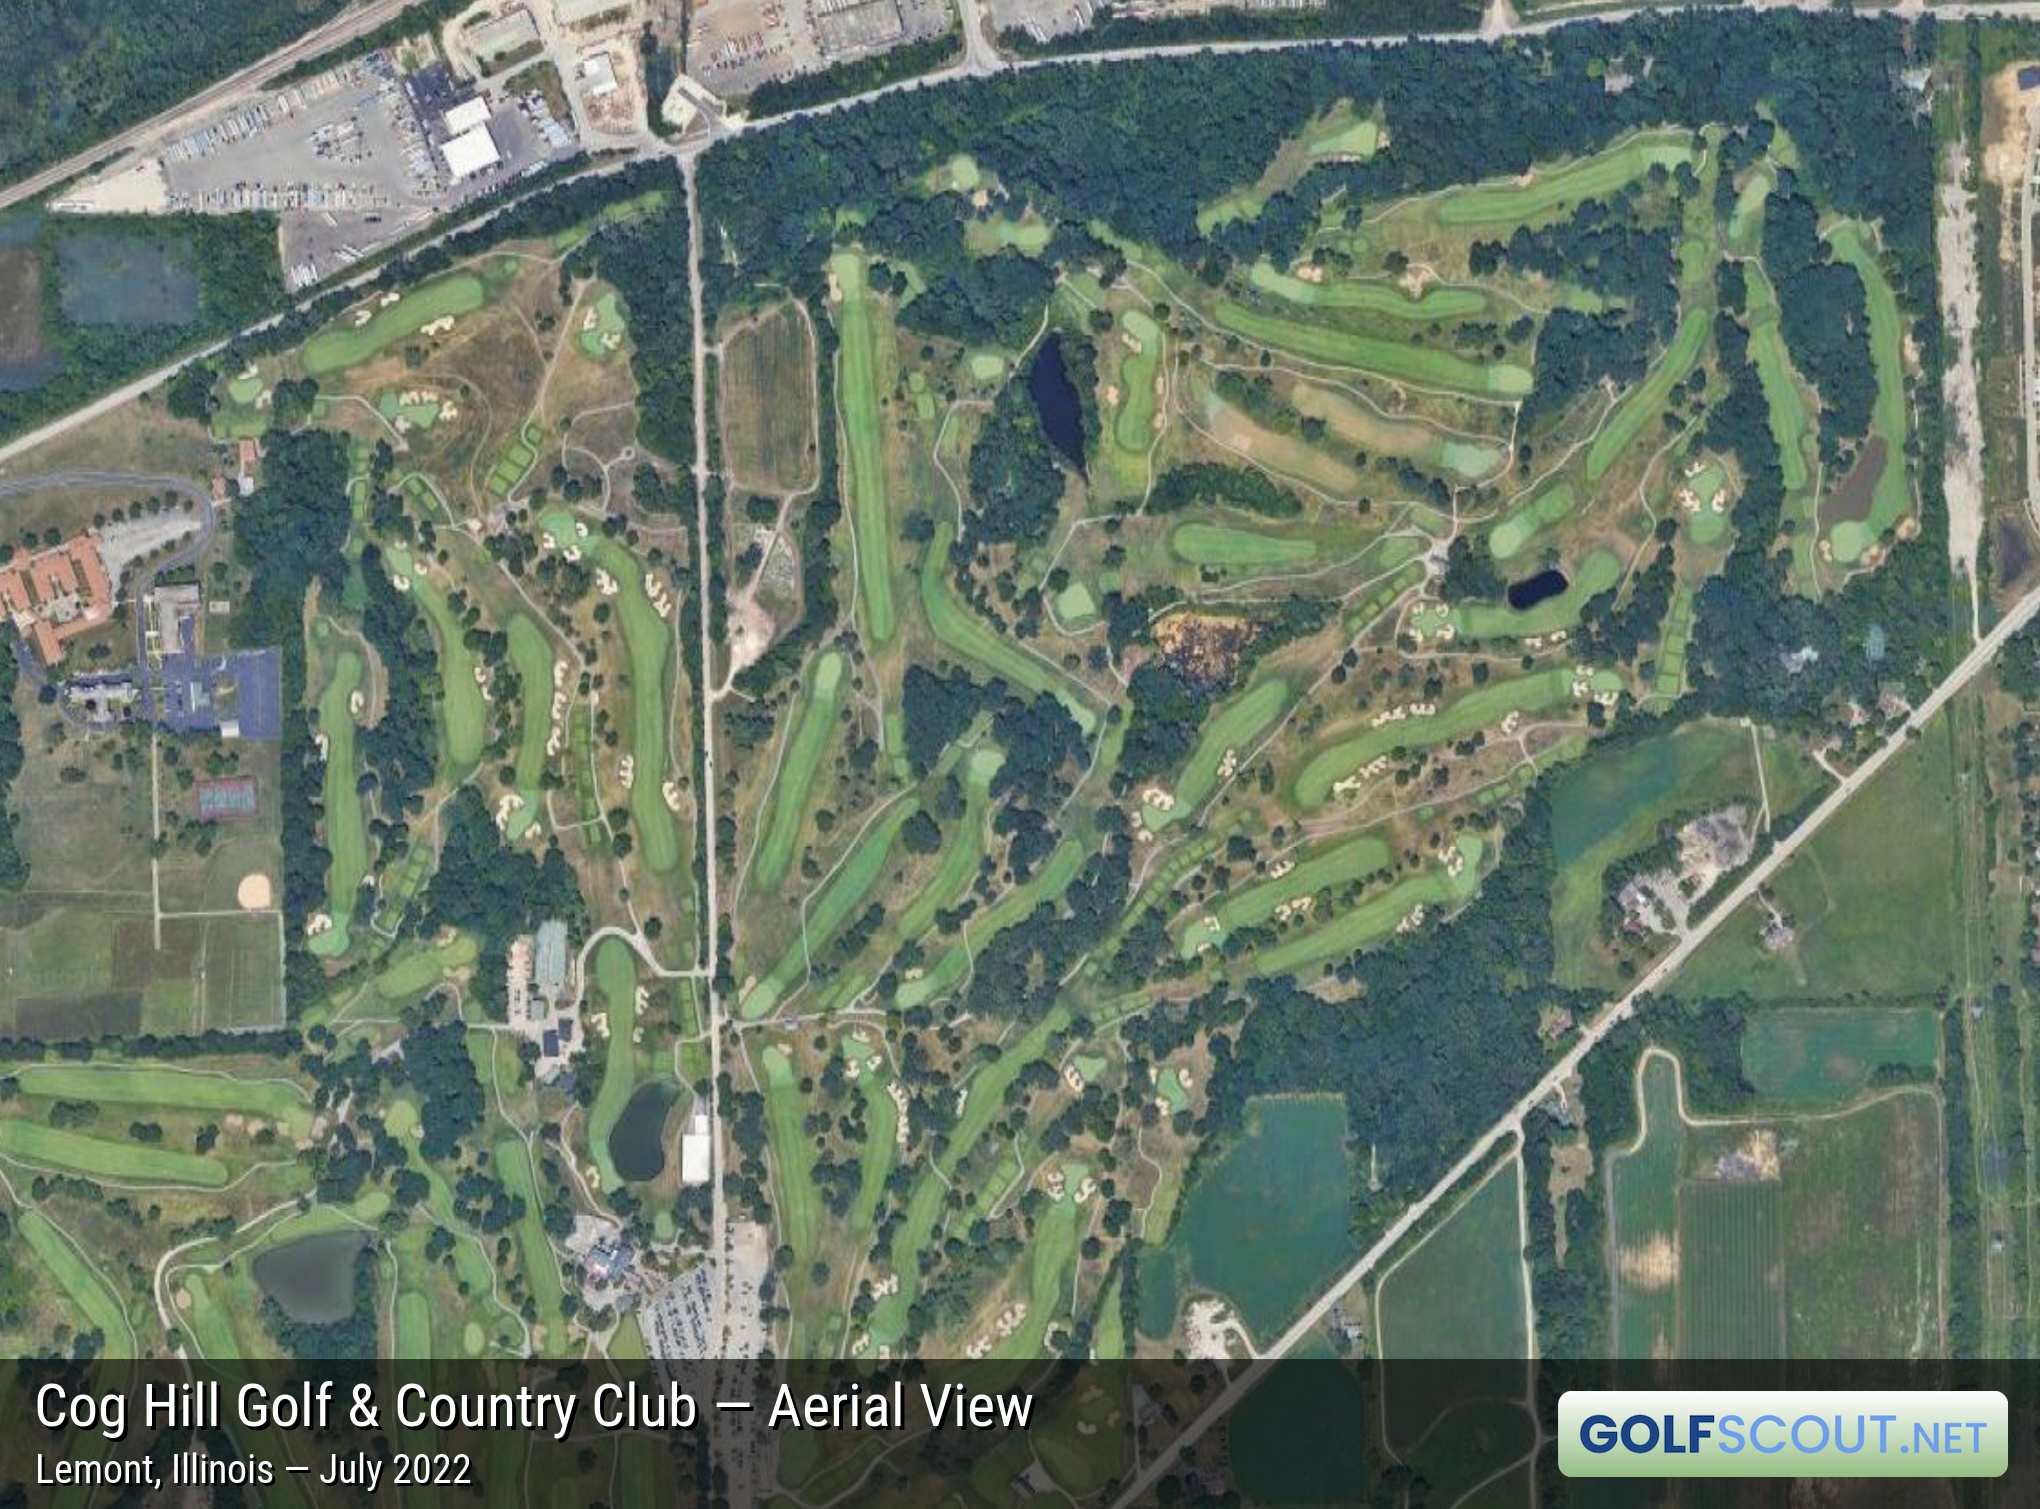 Aerial satellite imagery of Cog Hill Course #4 - Dubsdread in Lemont, Illinois. This image is zoomed in on the northeast area of Cog Hill where Courses 2 (Ravines) and 4 (Dubsdread) are located. Image courtesy of Google Maps.